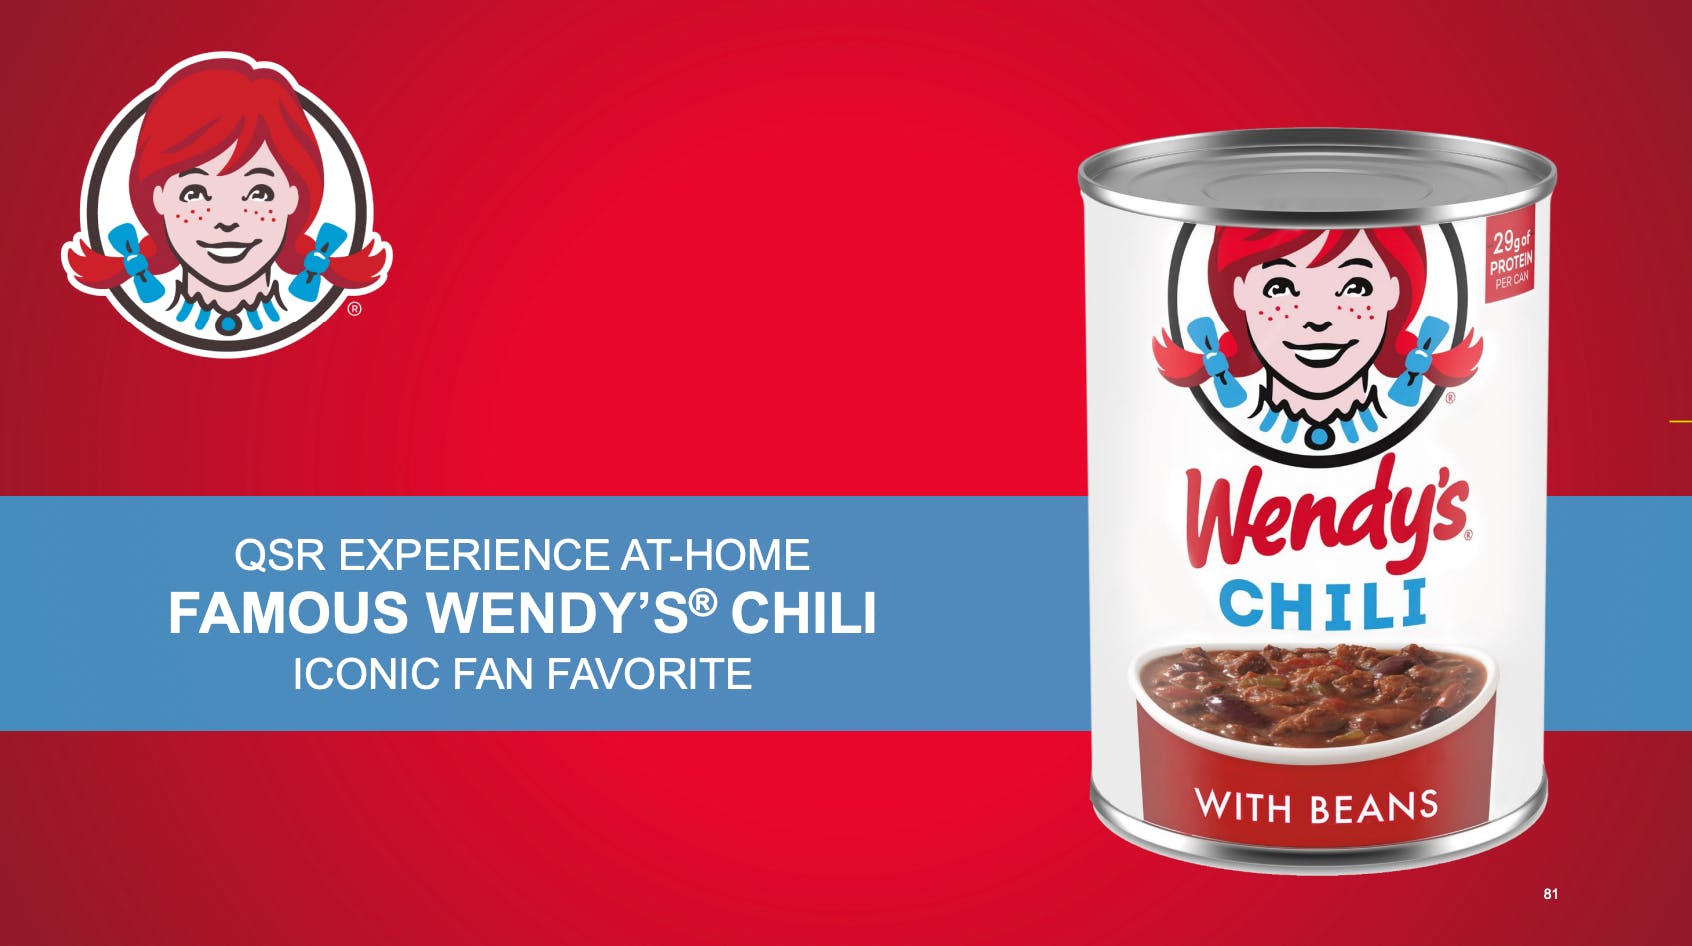 Official announcement of Wendy's chili in a can from Conagra foods.